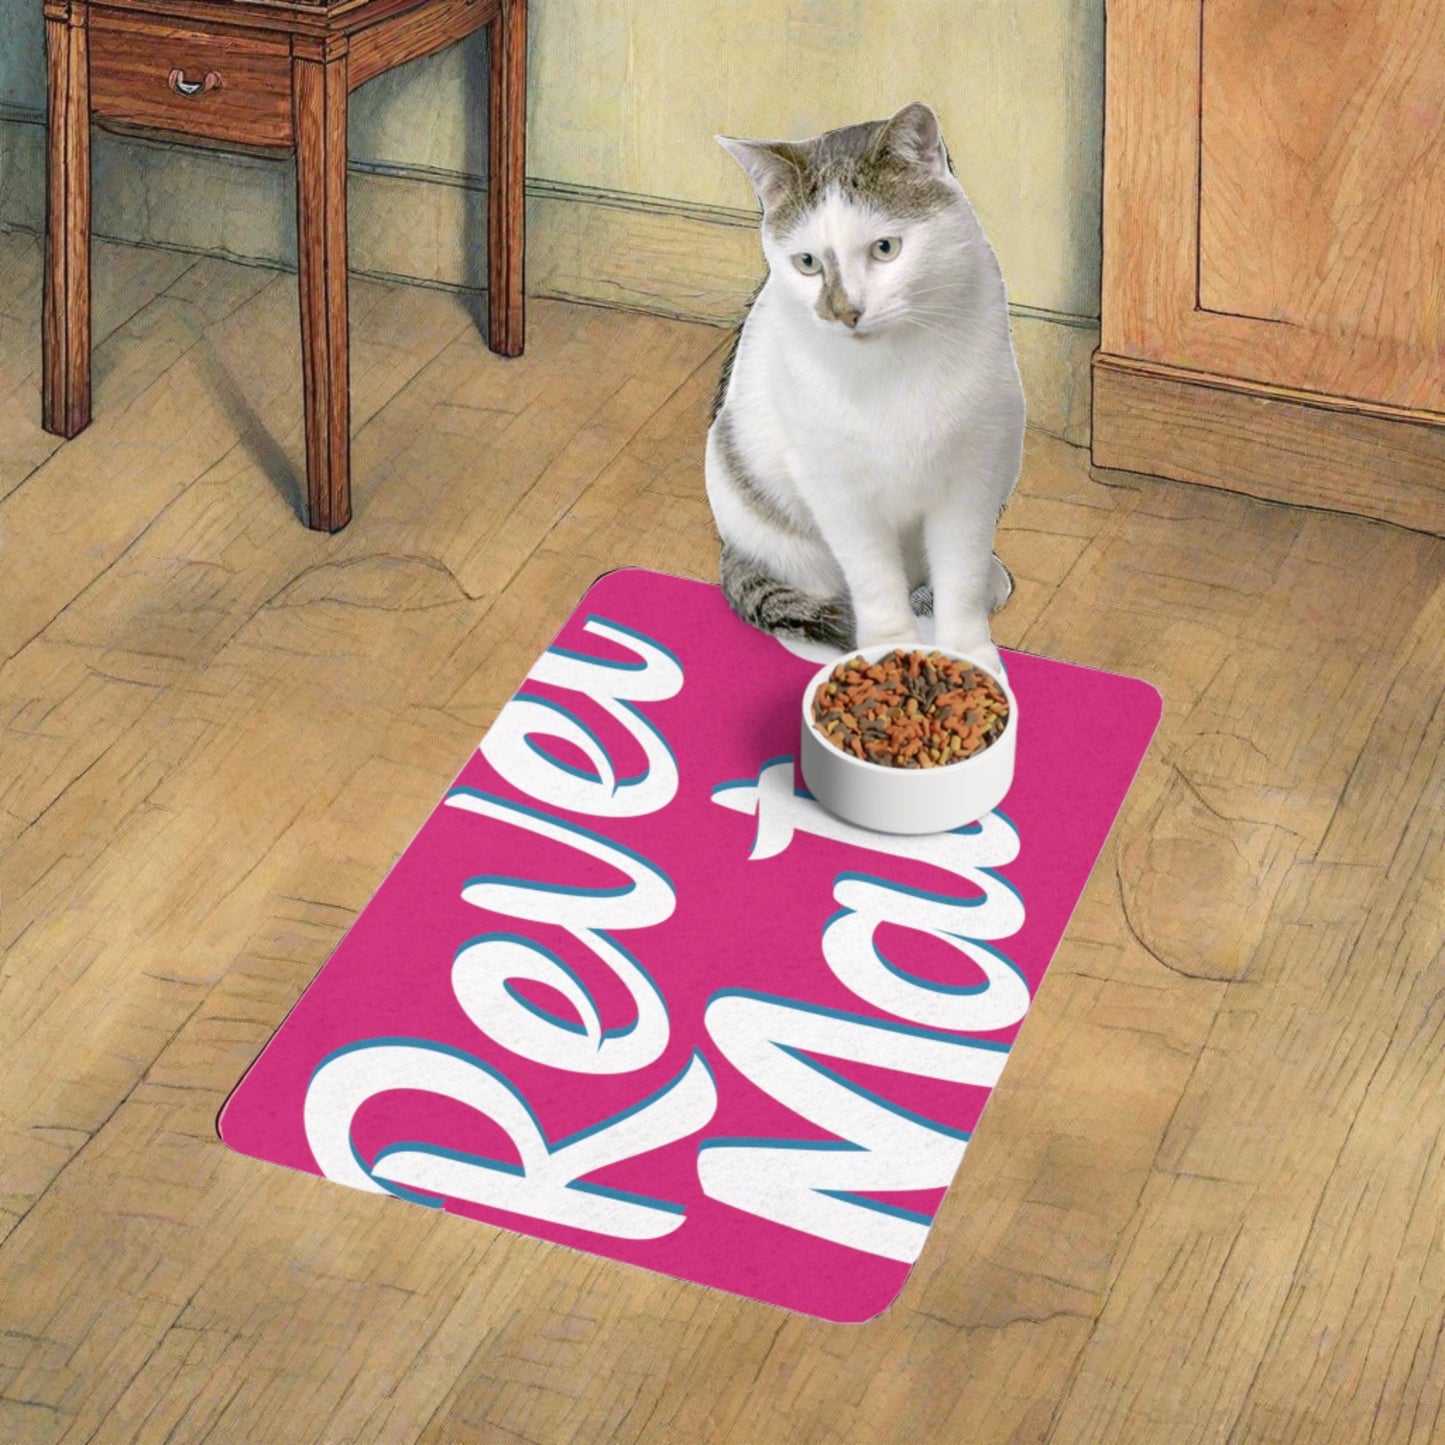 Pet Food Mat (12"x18") | for Dogs, Cats and all beloved Pets | Fuchsia & White RevelMates Design